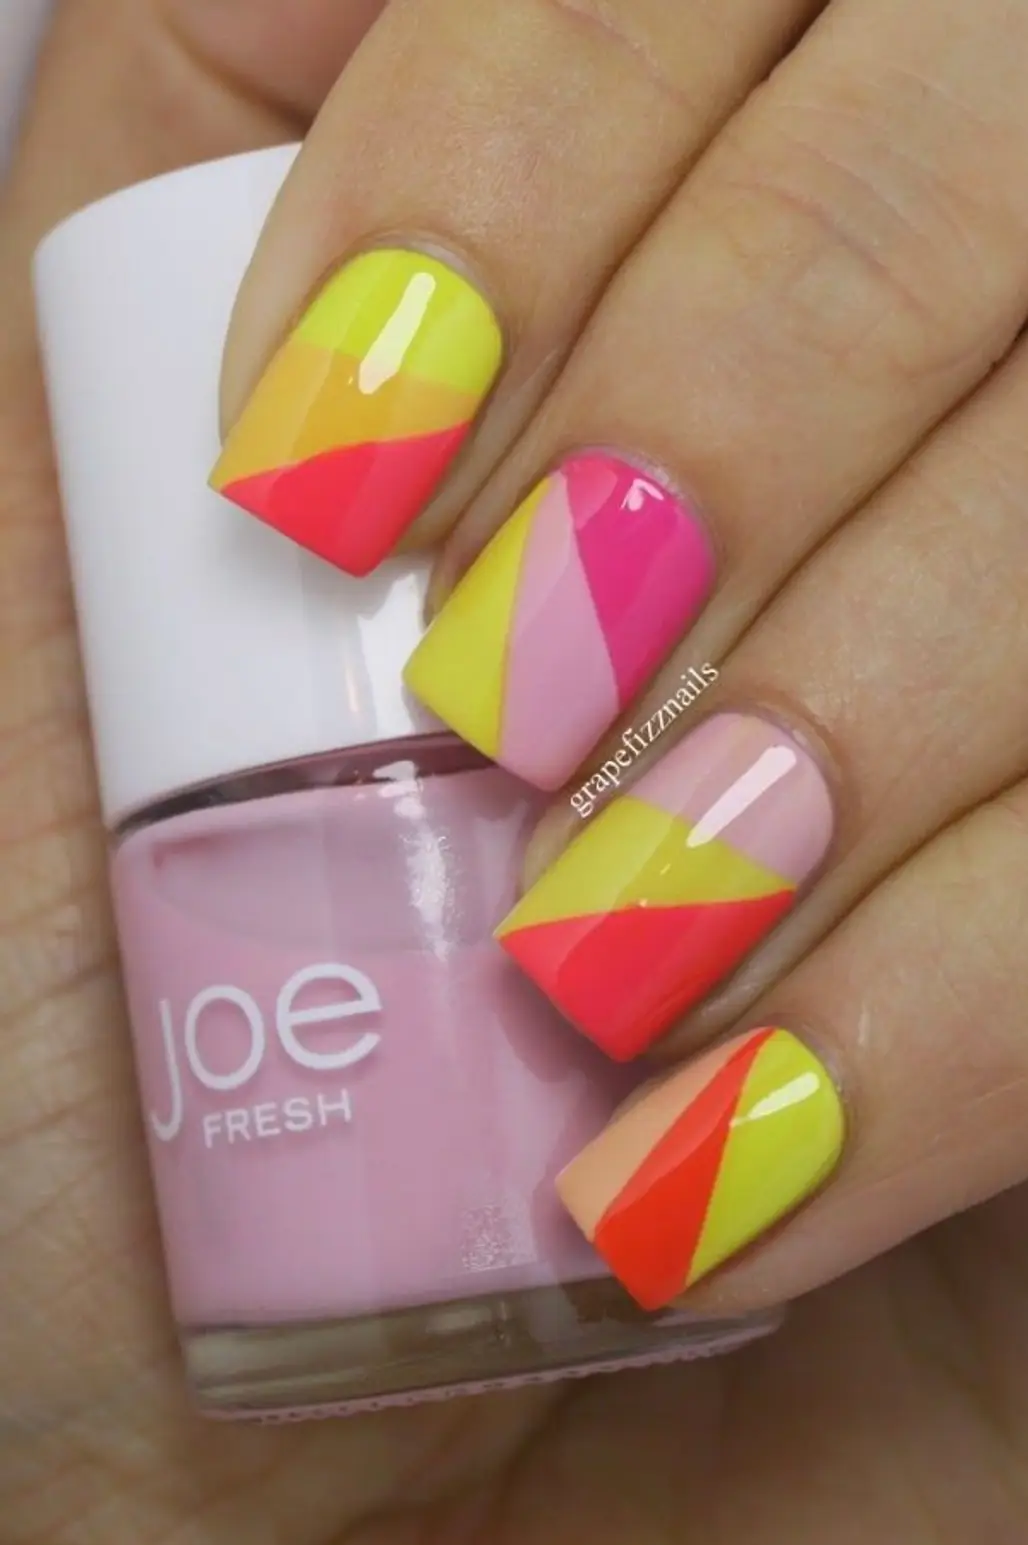 Why Not Try Some Fun Bright Colors?